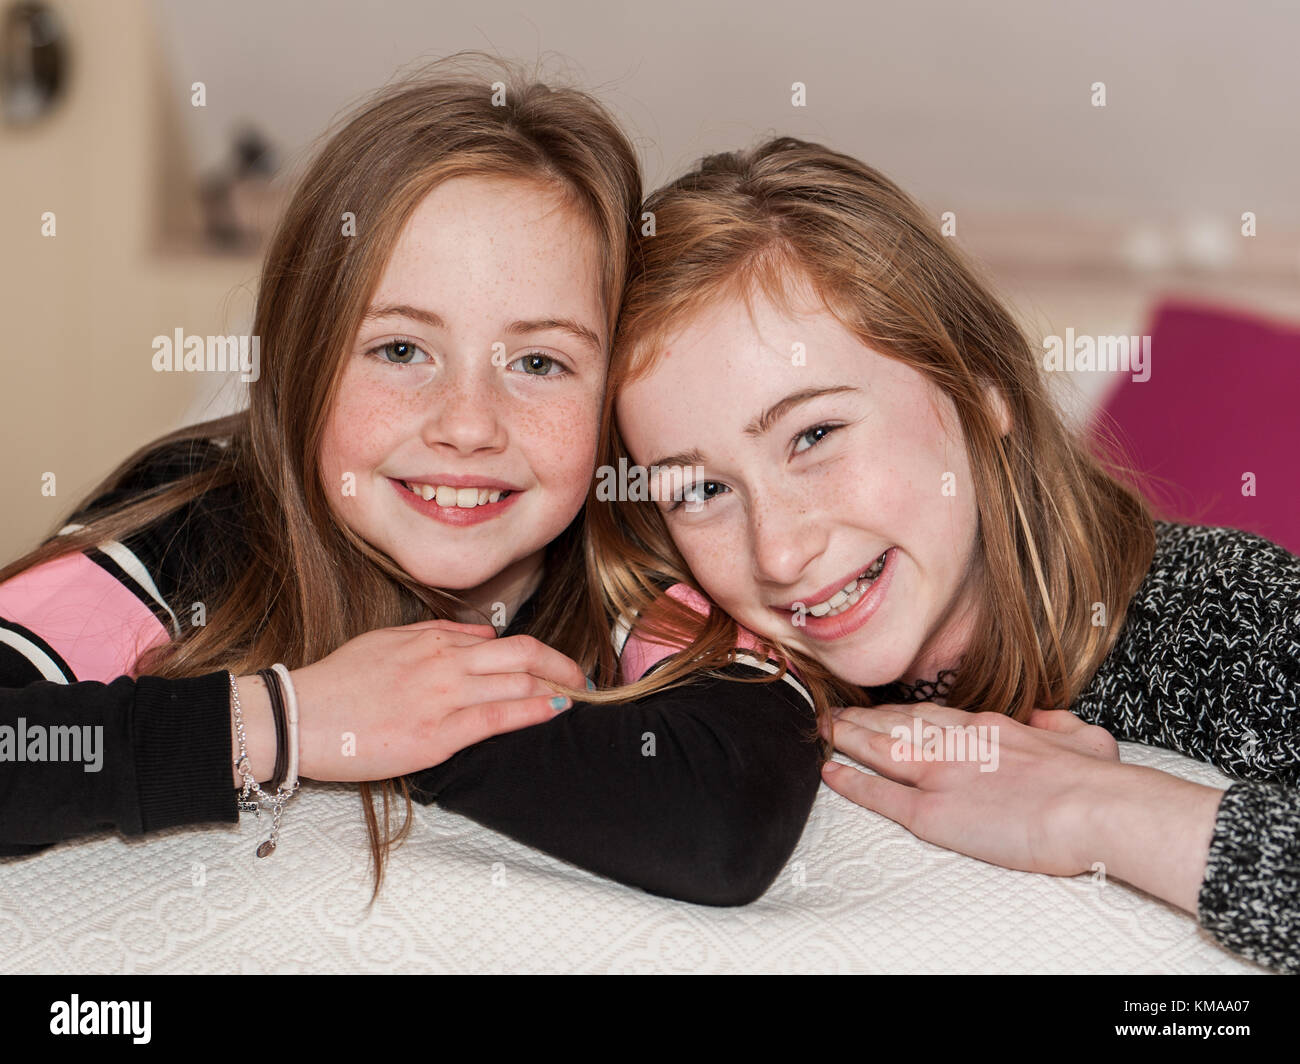 Two smiling young girls posing for the camera as a best friends forever concept. Stock Photo